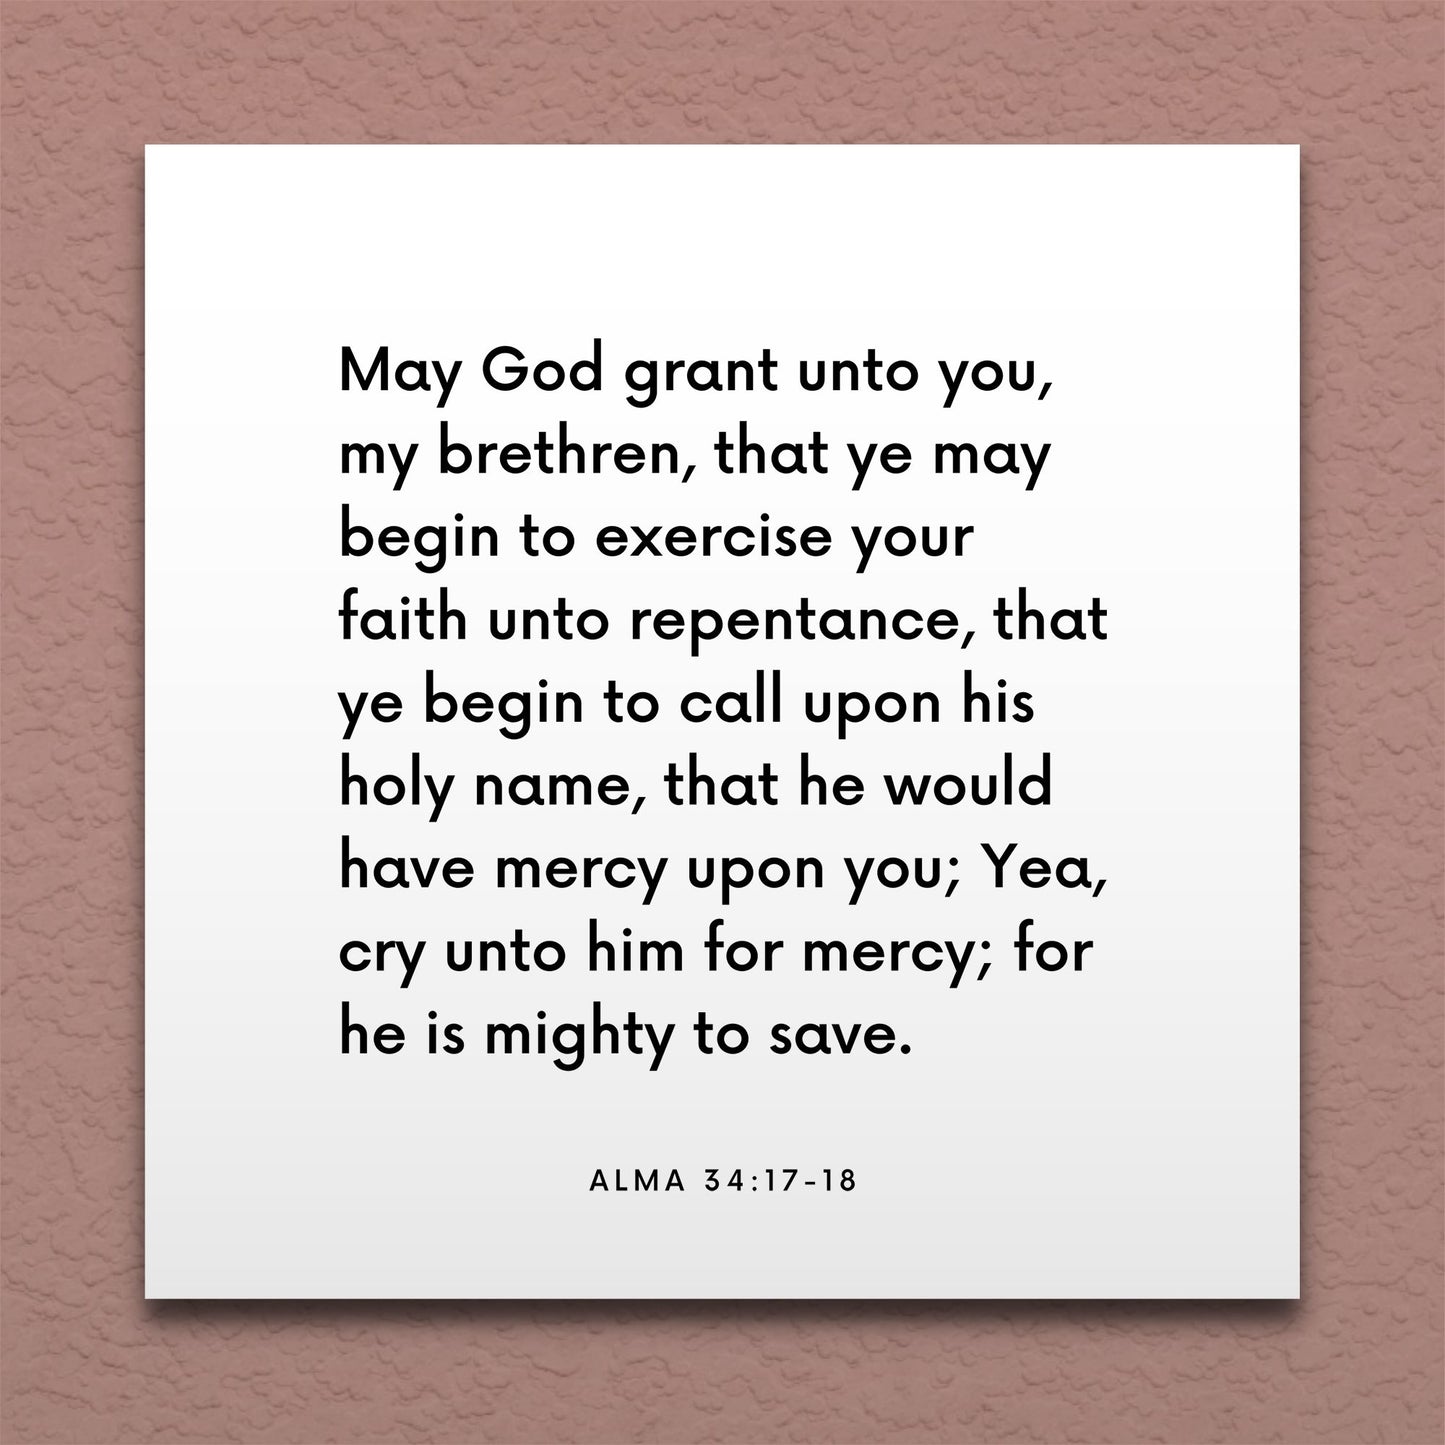 Wall-mounted scripture tile for Alma 34:17-18 - "That ye may begin to exercise your faith"